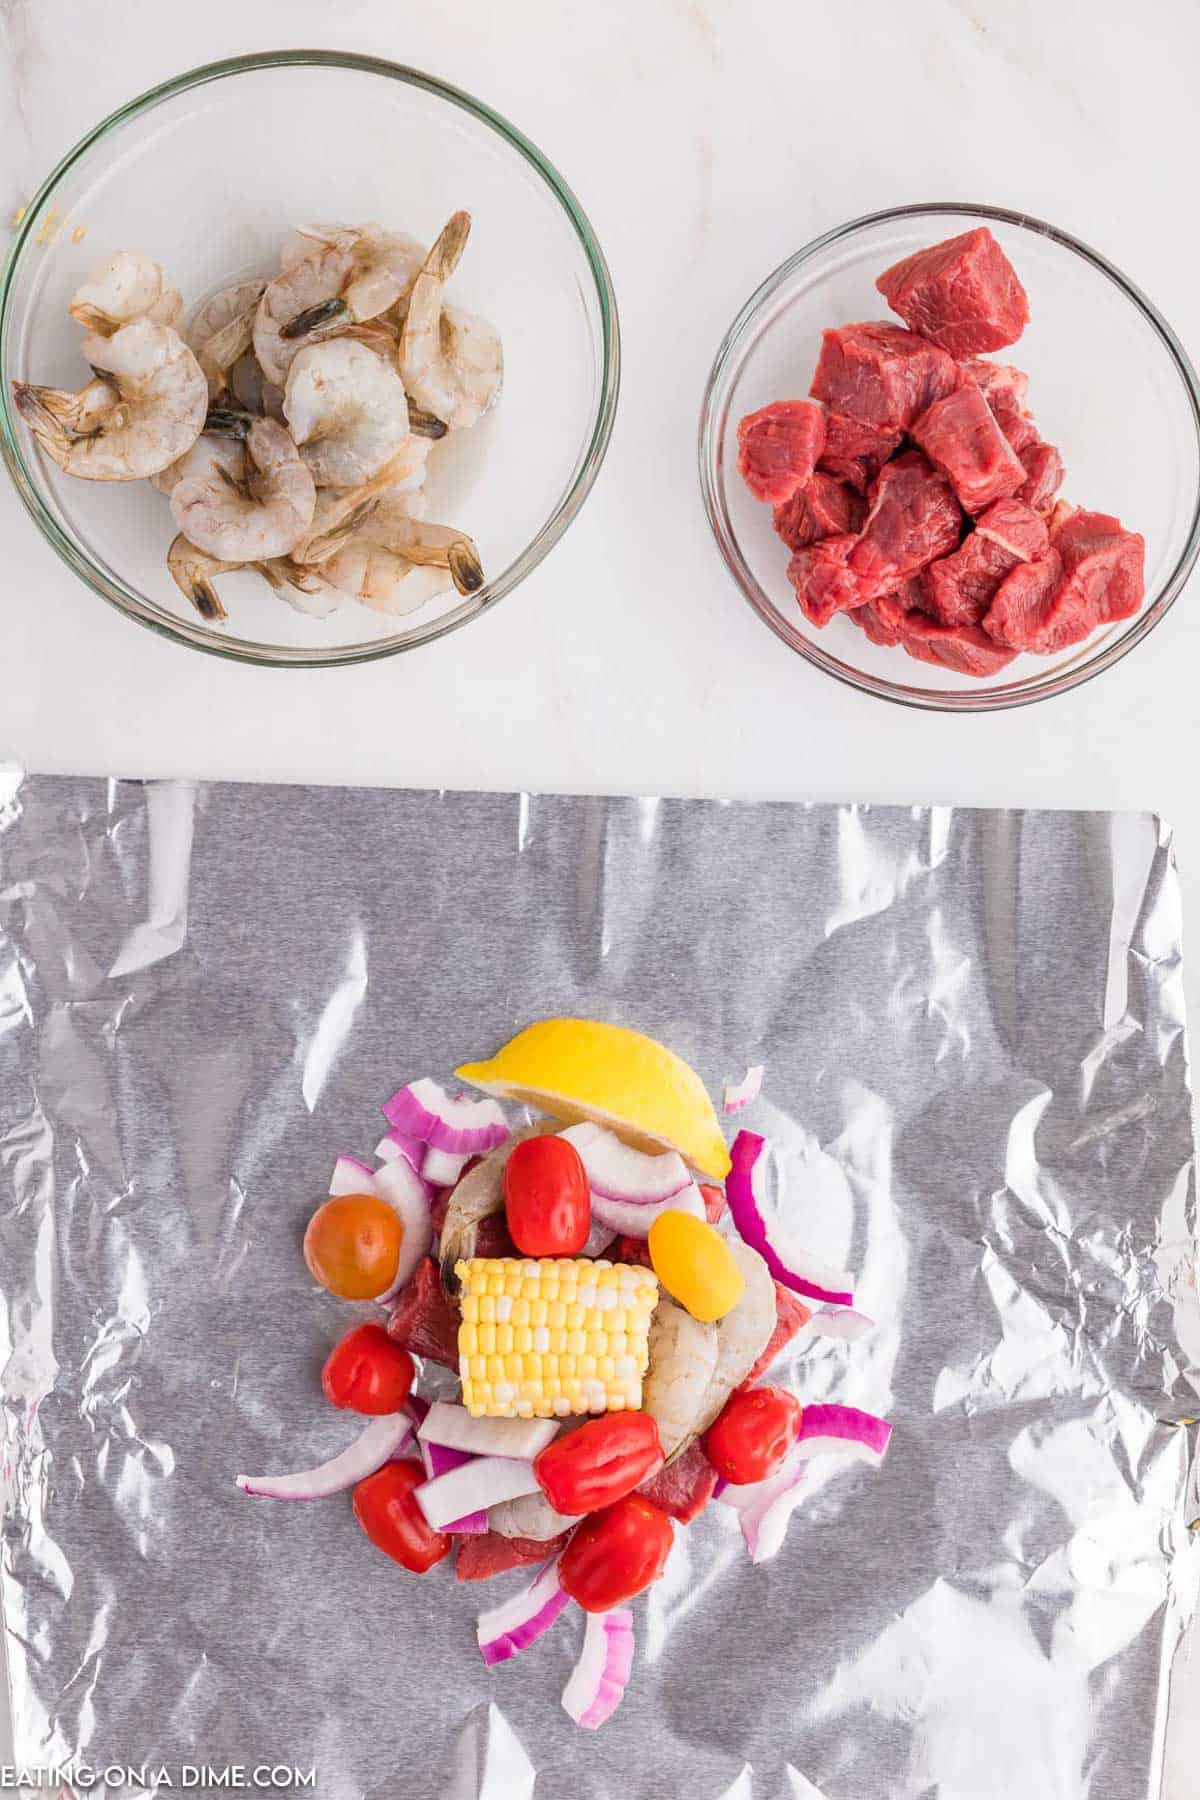 Piece of foil topped with cherry tomatoes, corn on the cob, red onion and lemon wedges with a bowl of shrimp and steak bites on the side